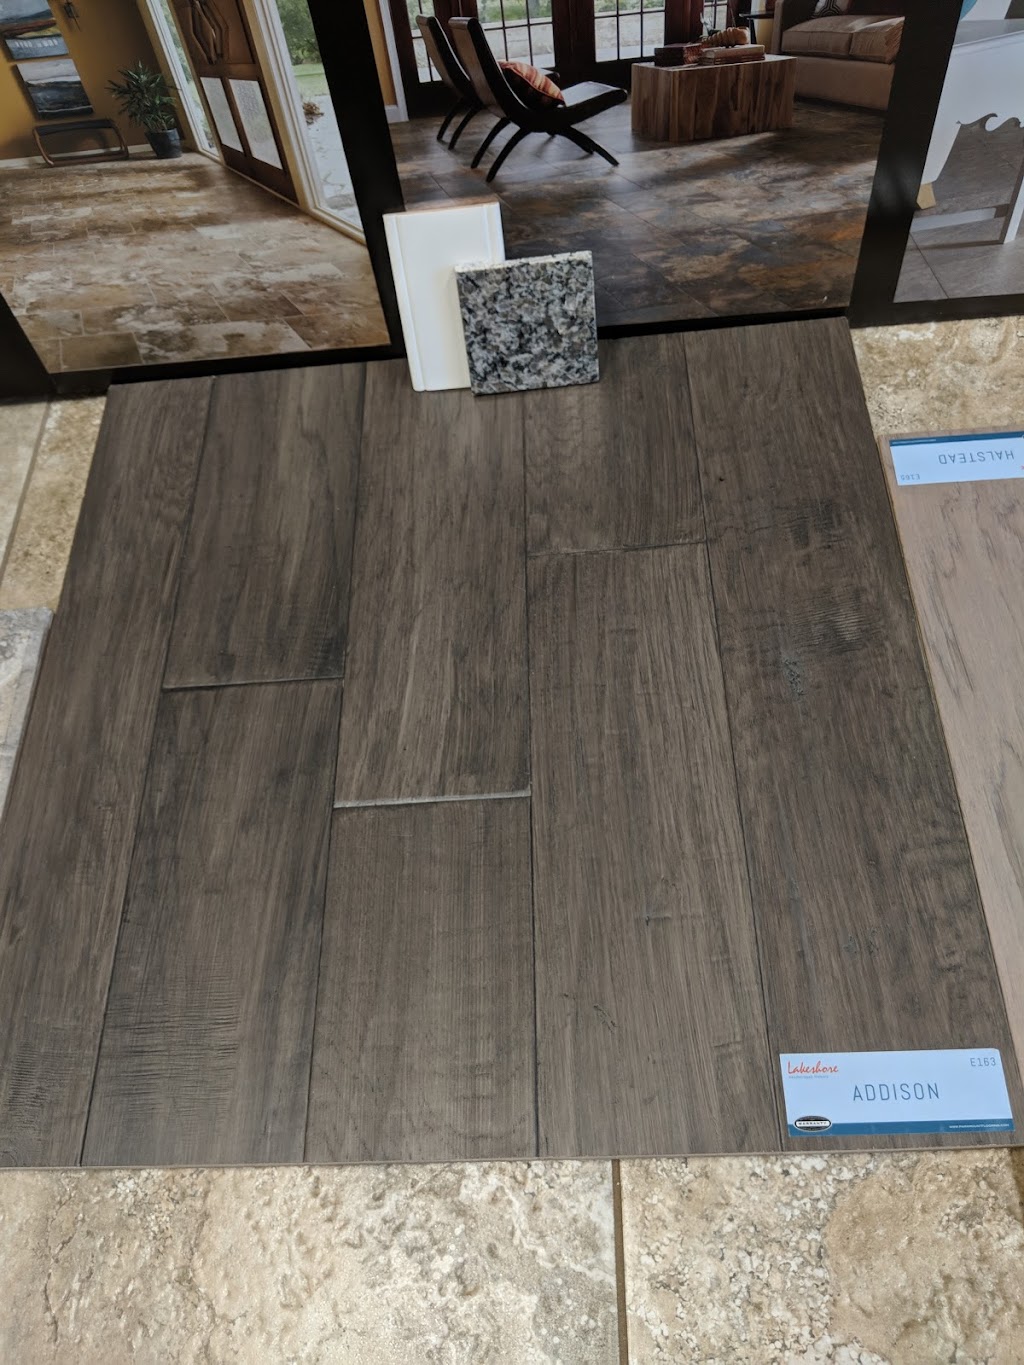 Custom Floors and More Inc. | 4198 Old Collinsville Rd, Belleville, IL 62226, USA | Phone: (618) 277-7233